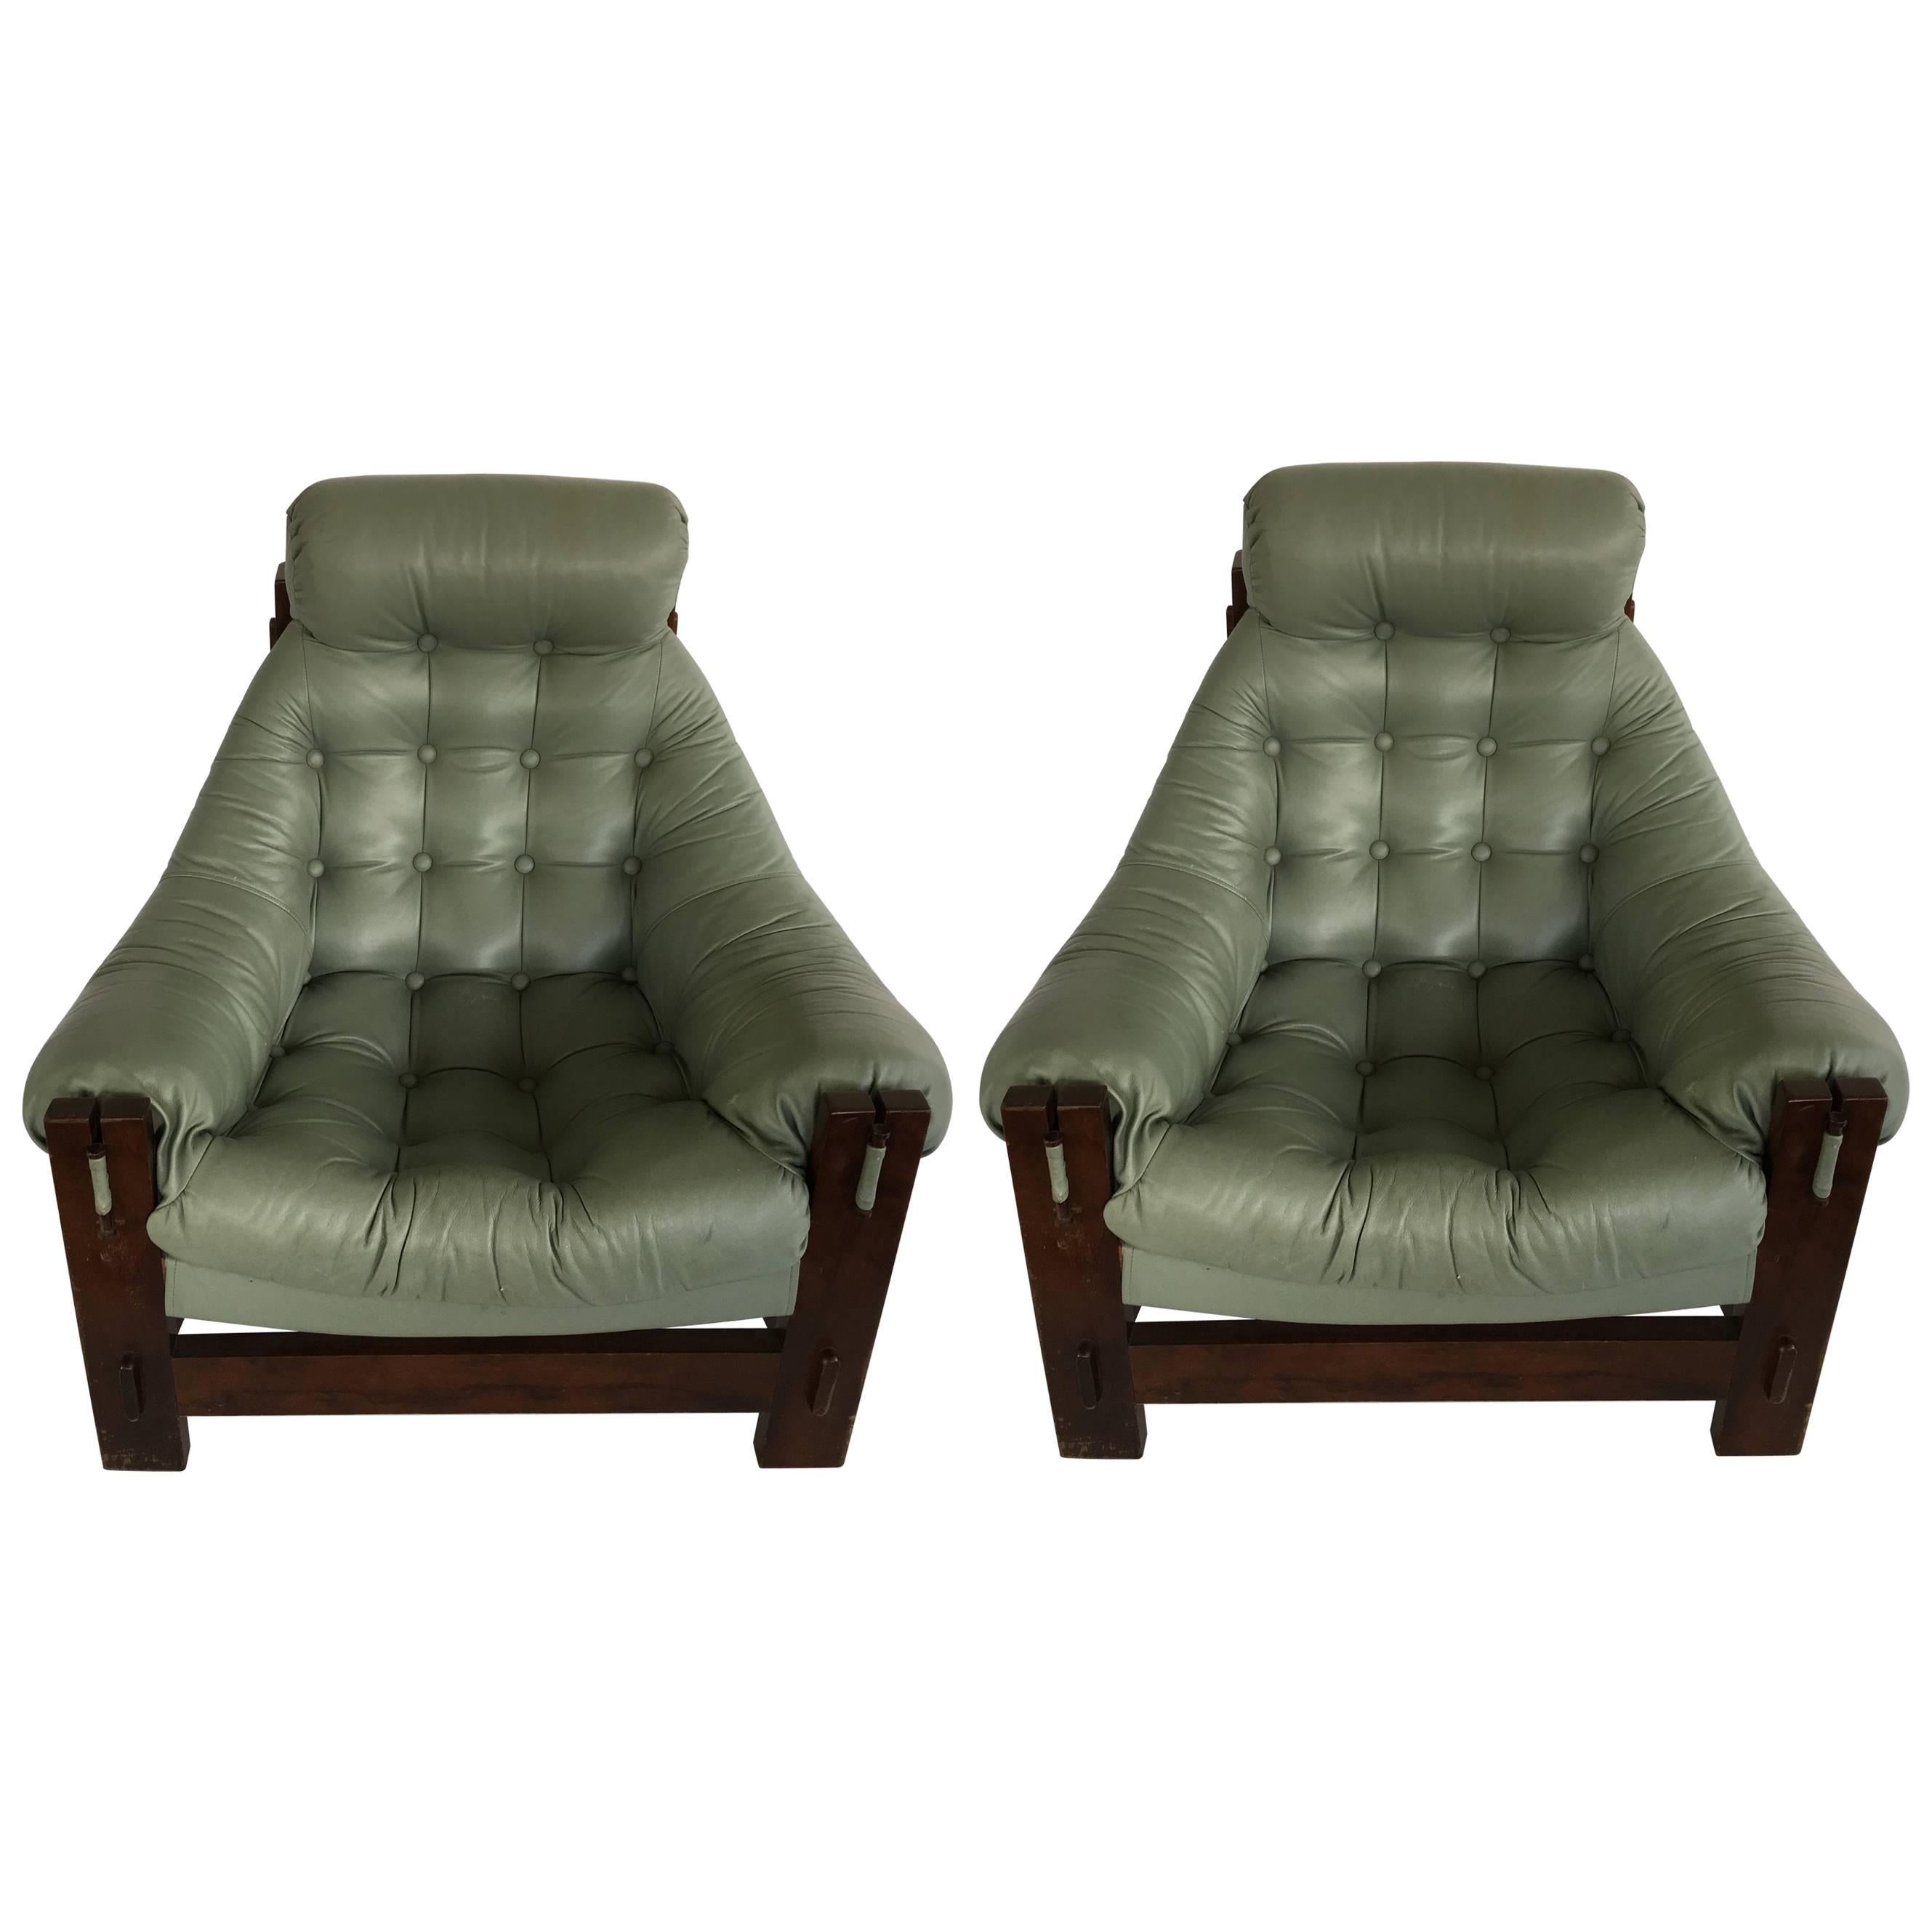 Pair of Leather Armchairs by Grafton Everest, 1970s For Sale